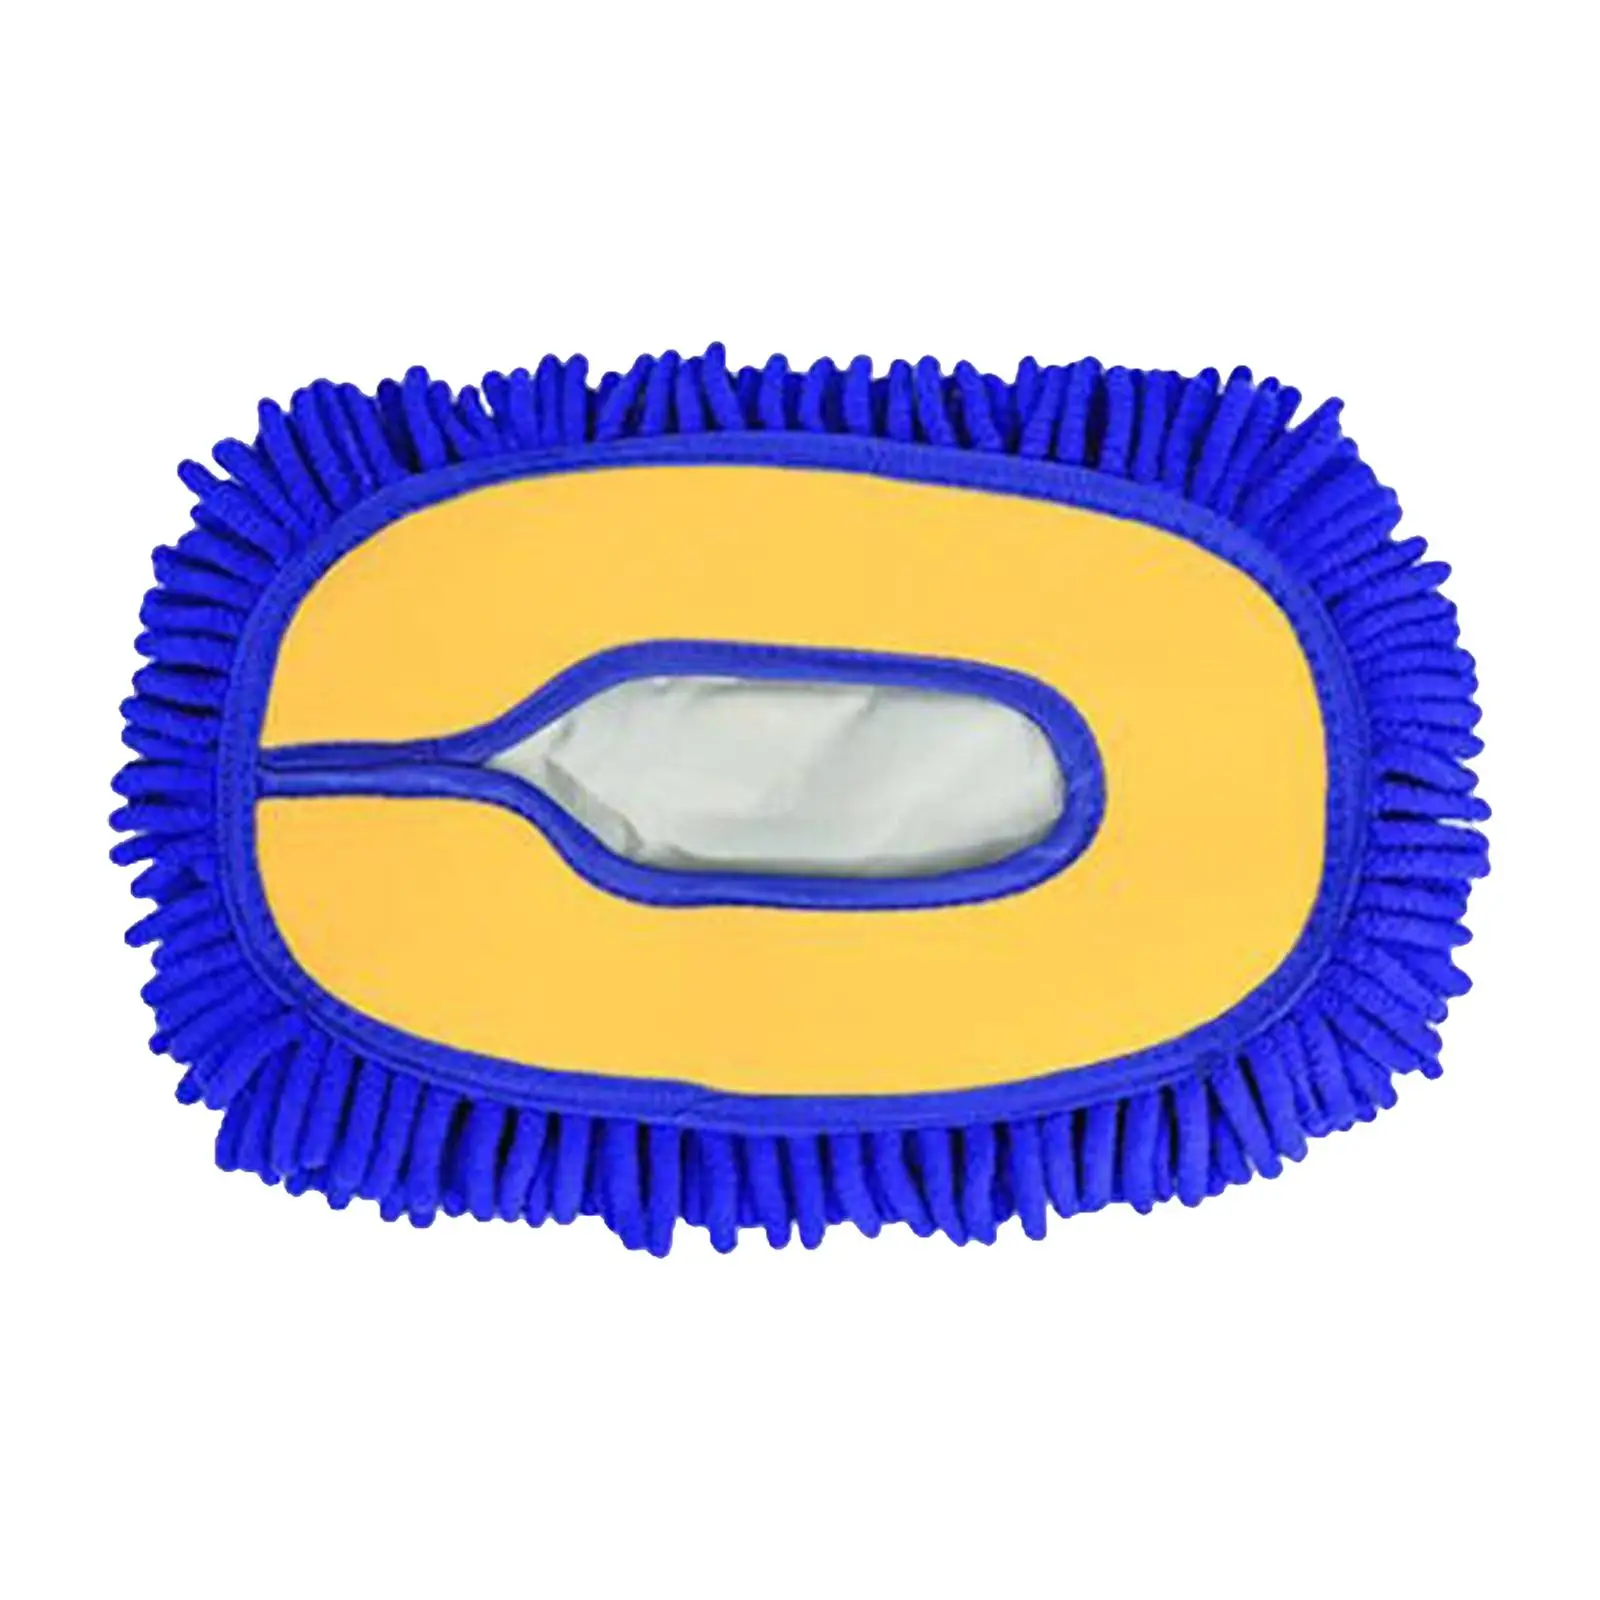 Car Wash Brush Replacement Head Accessory Highly Absorbent Cleaning Tool